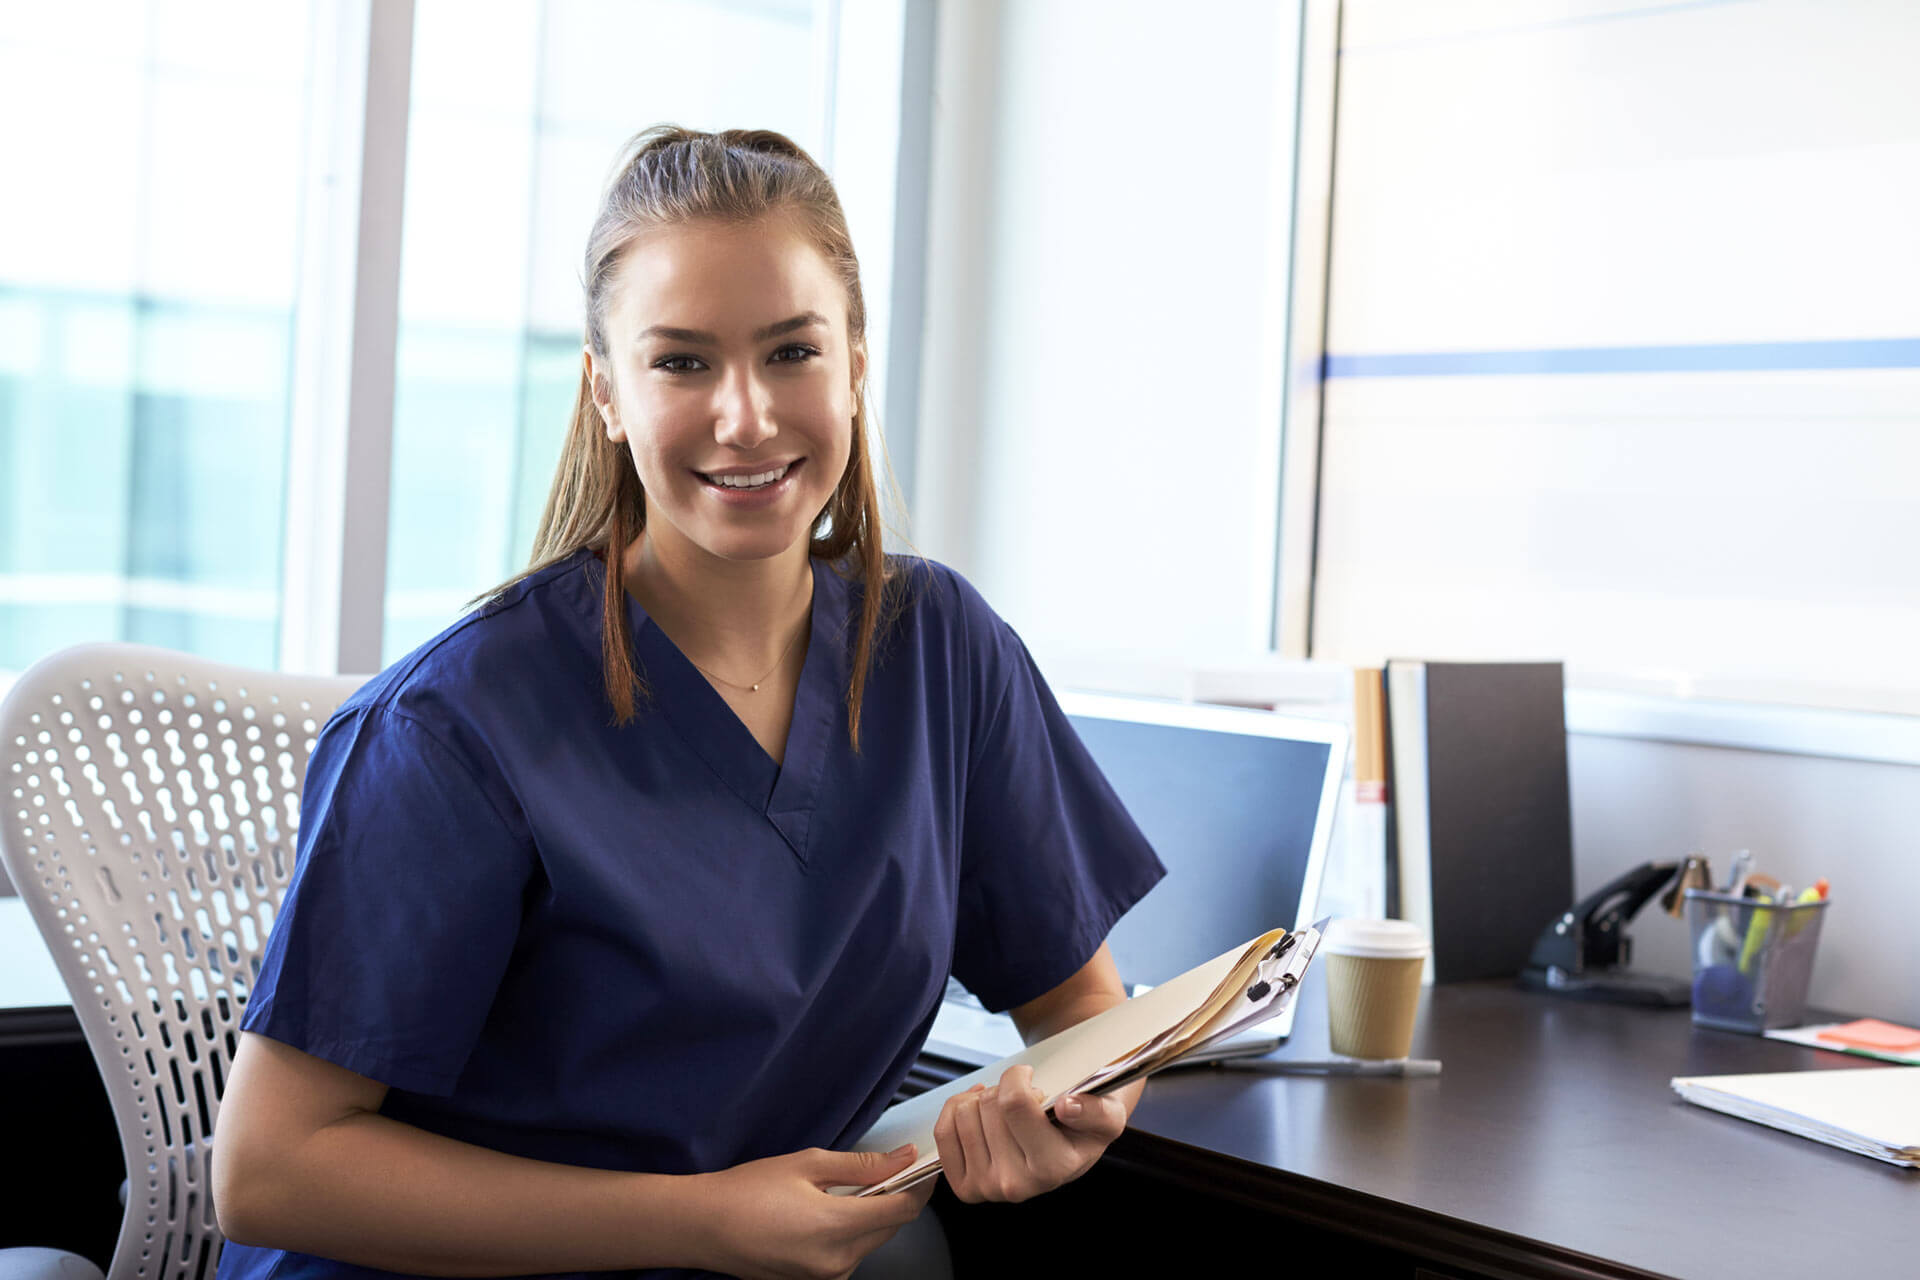 Important Considerations to Help You Pass the NCLEX-RN®